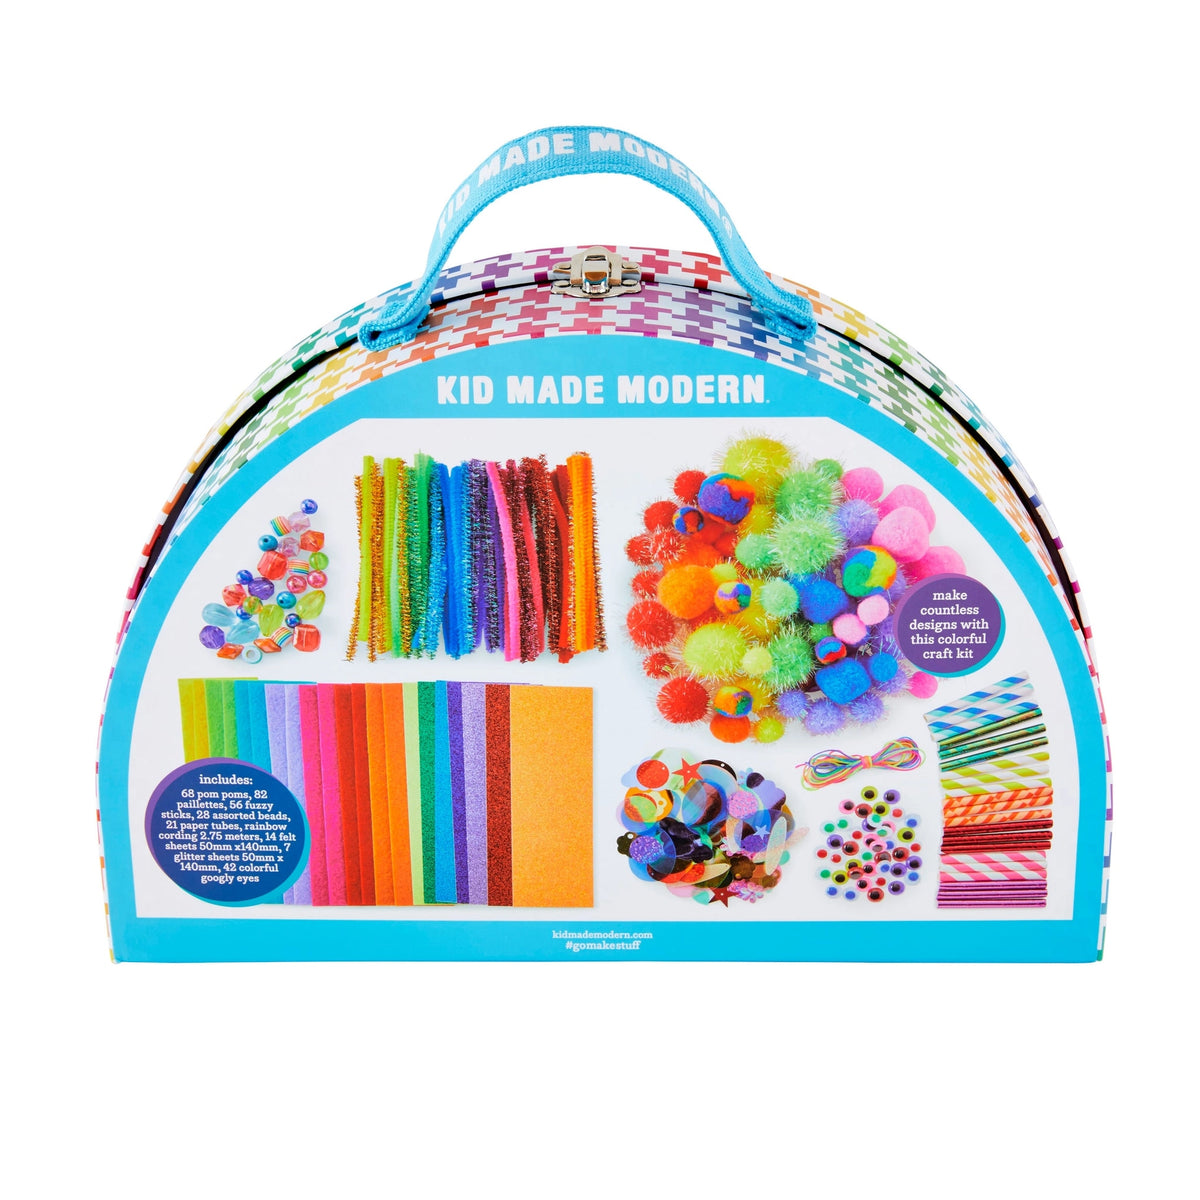 Rainbow Craft Kit  Sisters Boutique & Gifts, Inc.